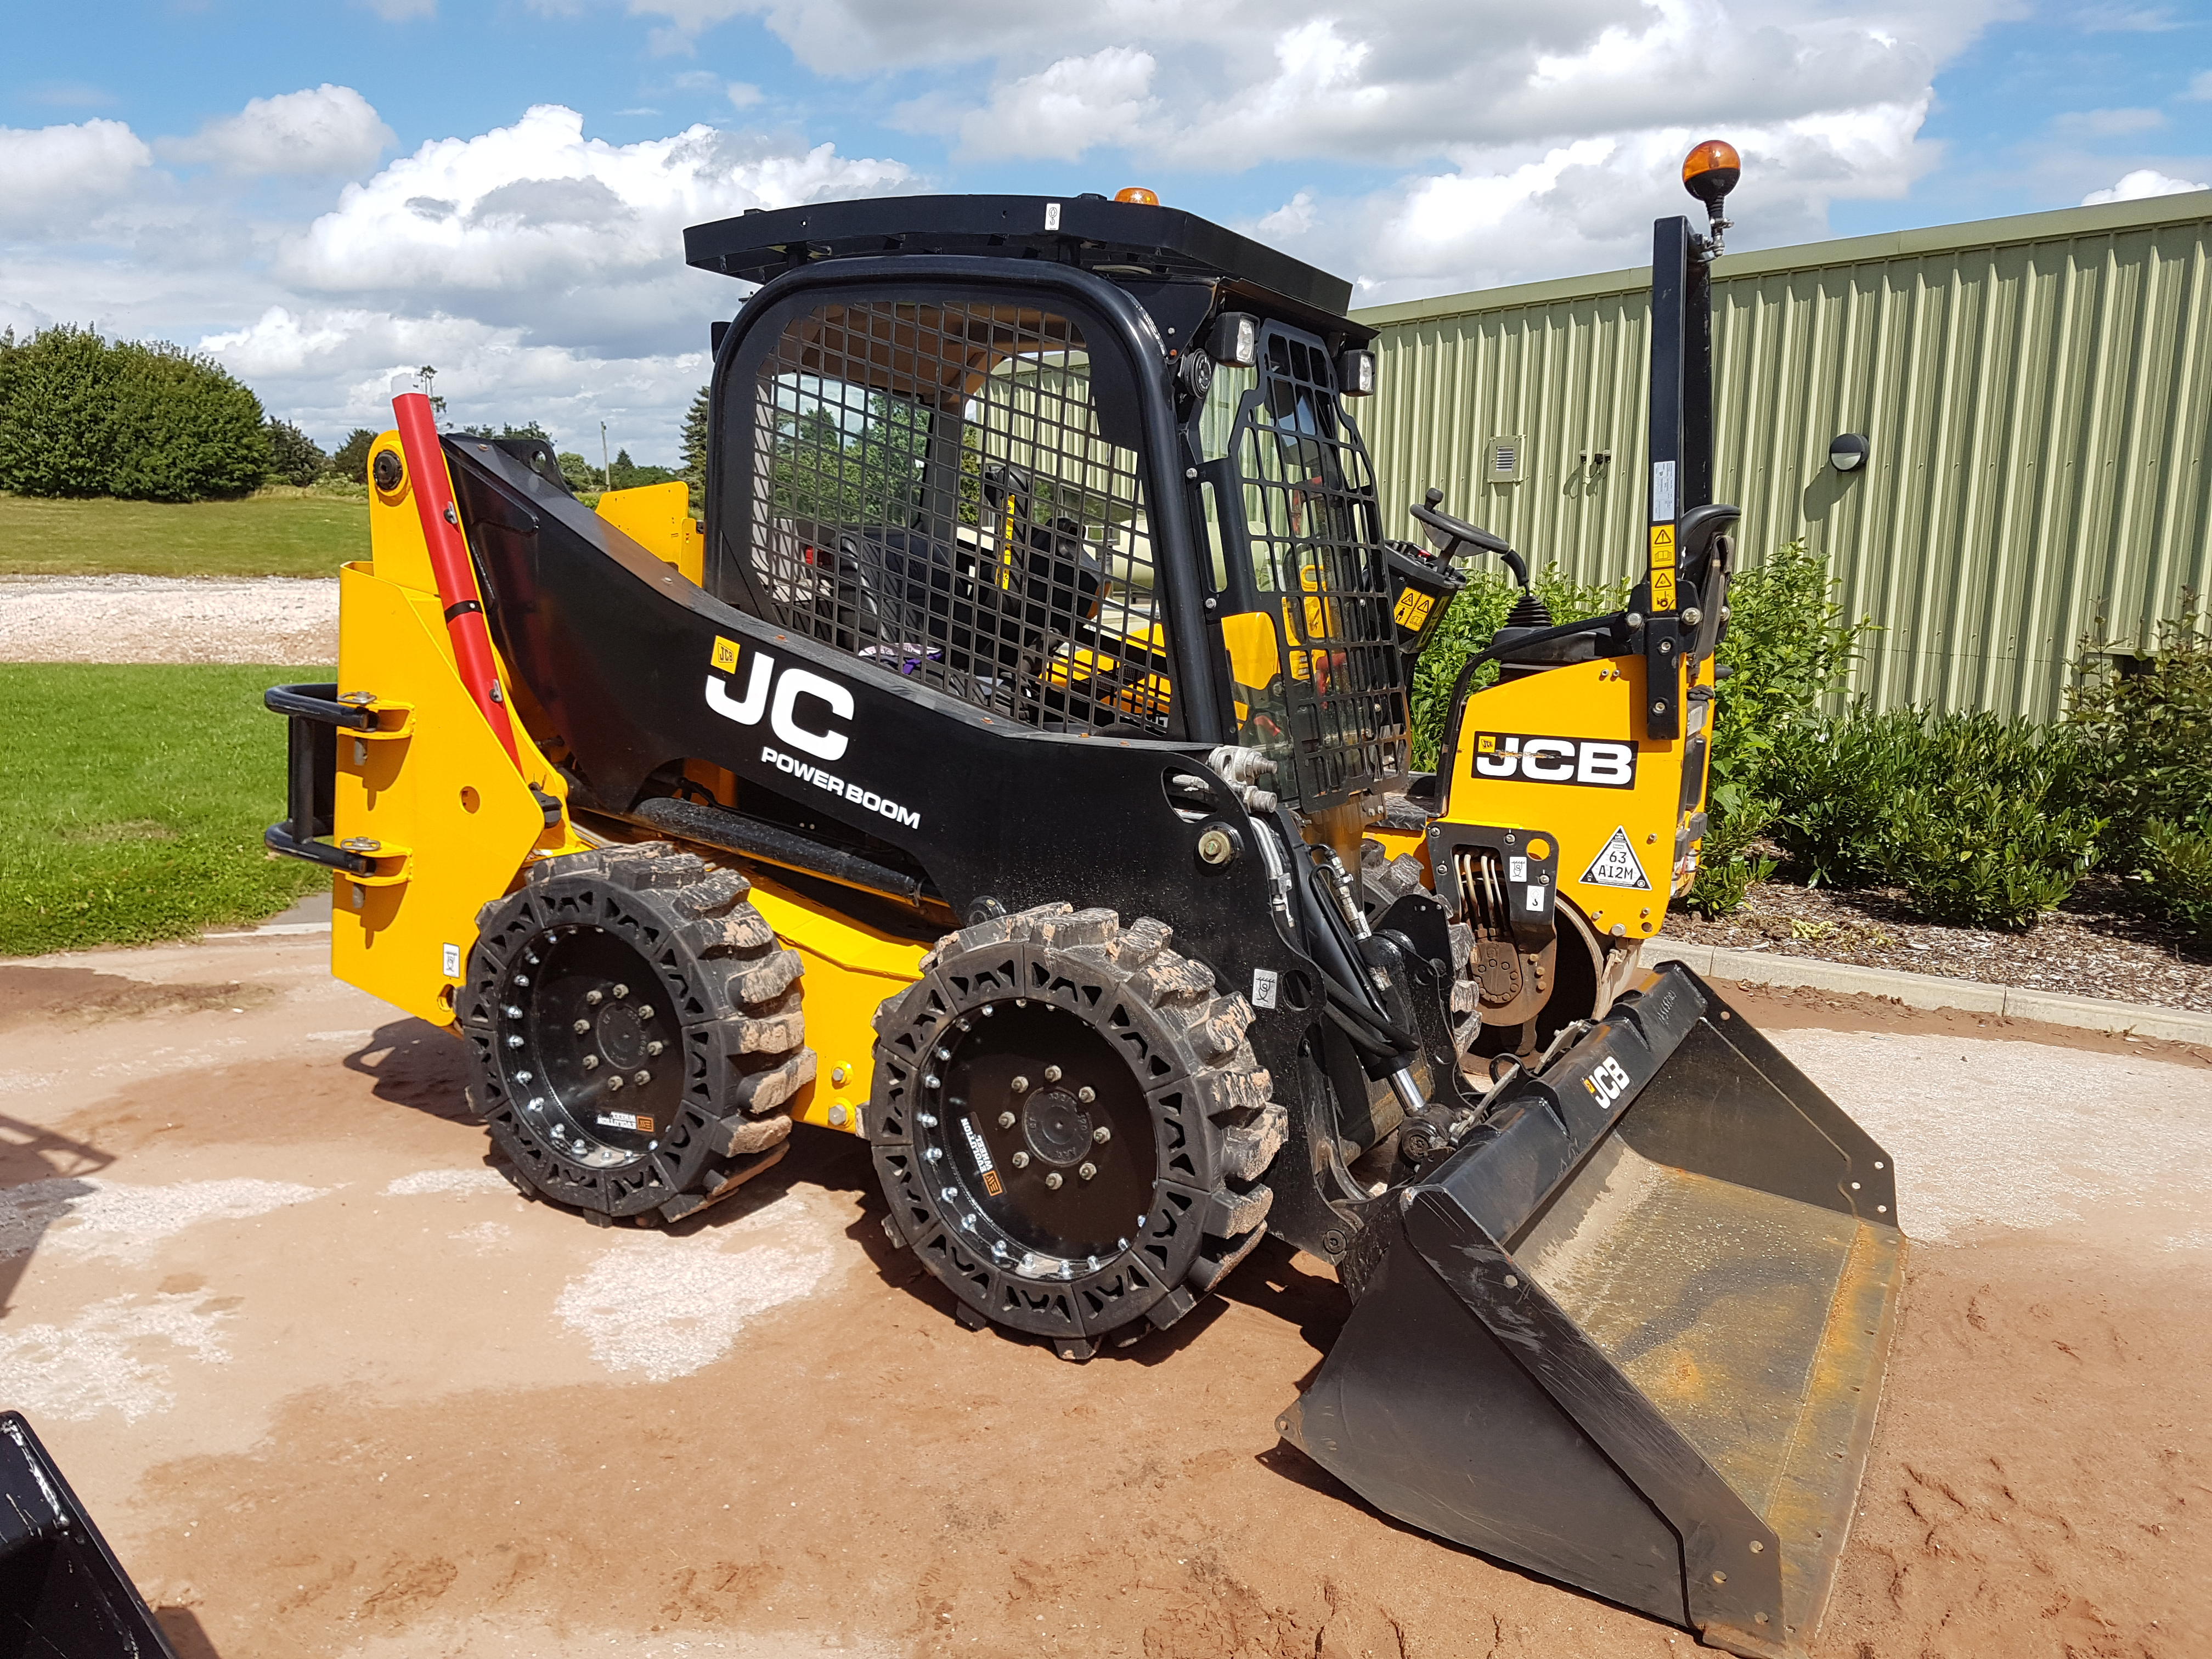 Here is an image of a yellow JCB Skid Steer using Bobcat skid steer tires.